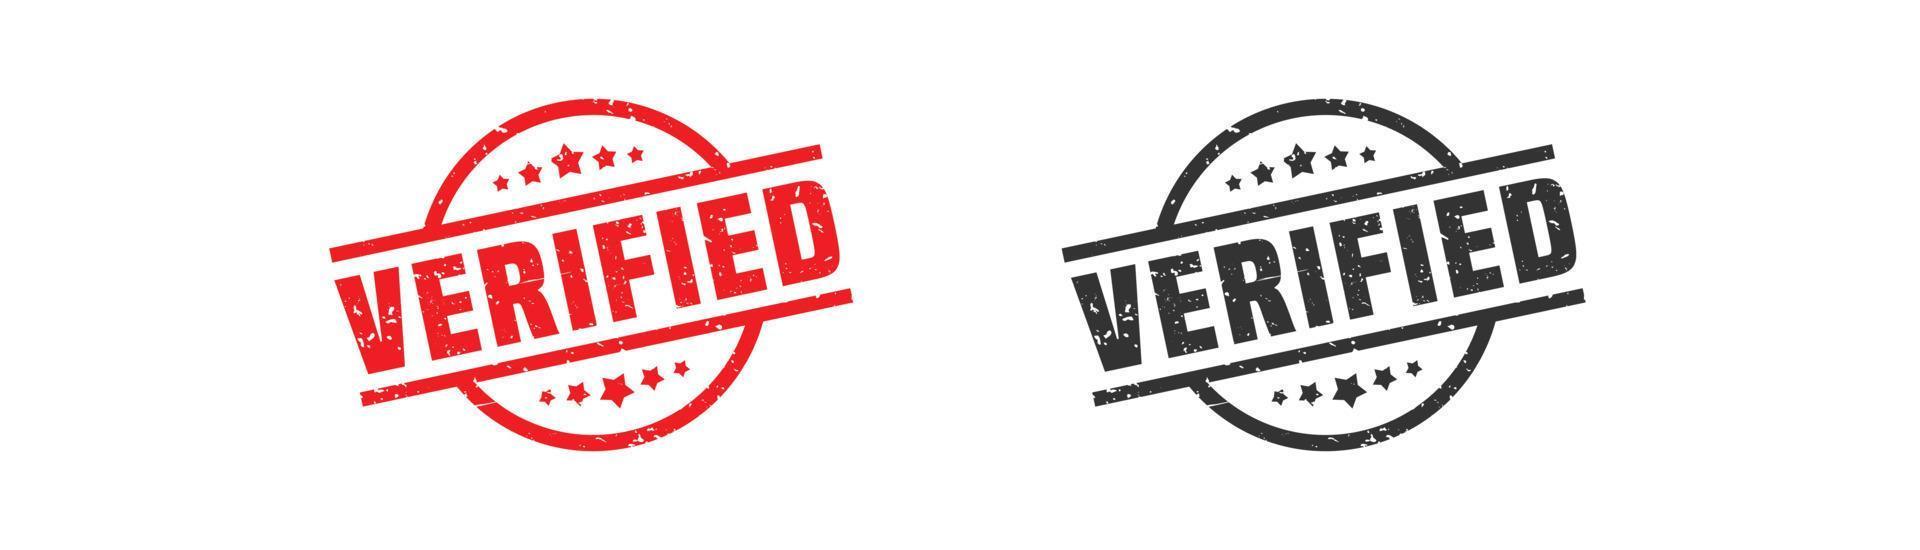 Verified stamp rubber with grunge style on white background. vector